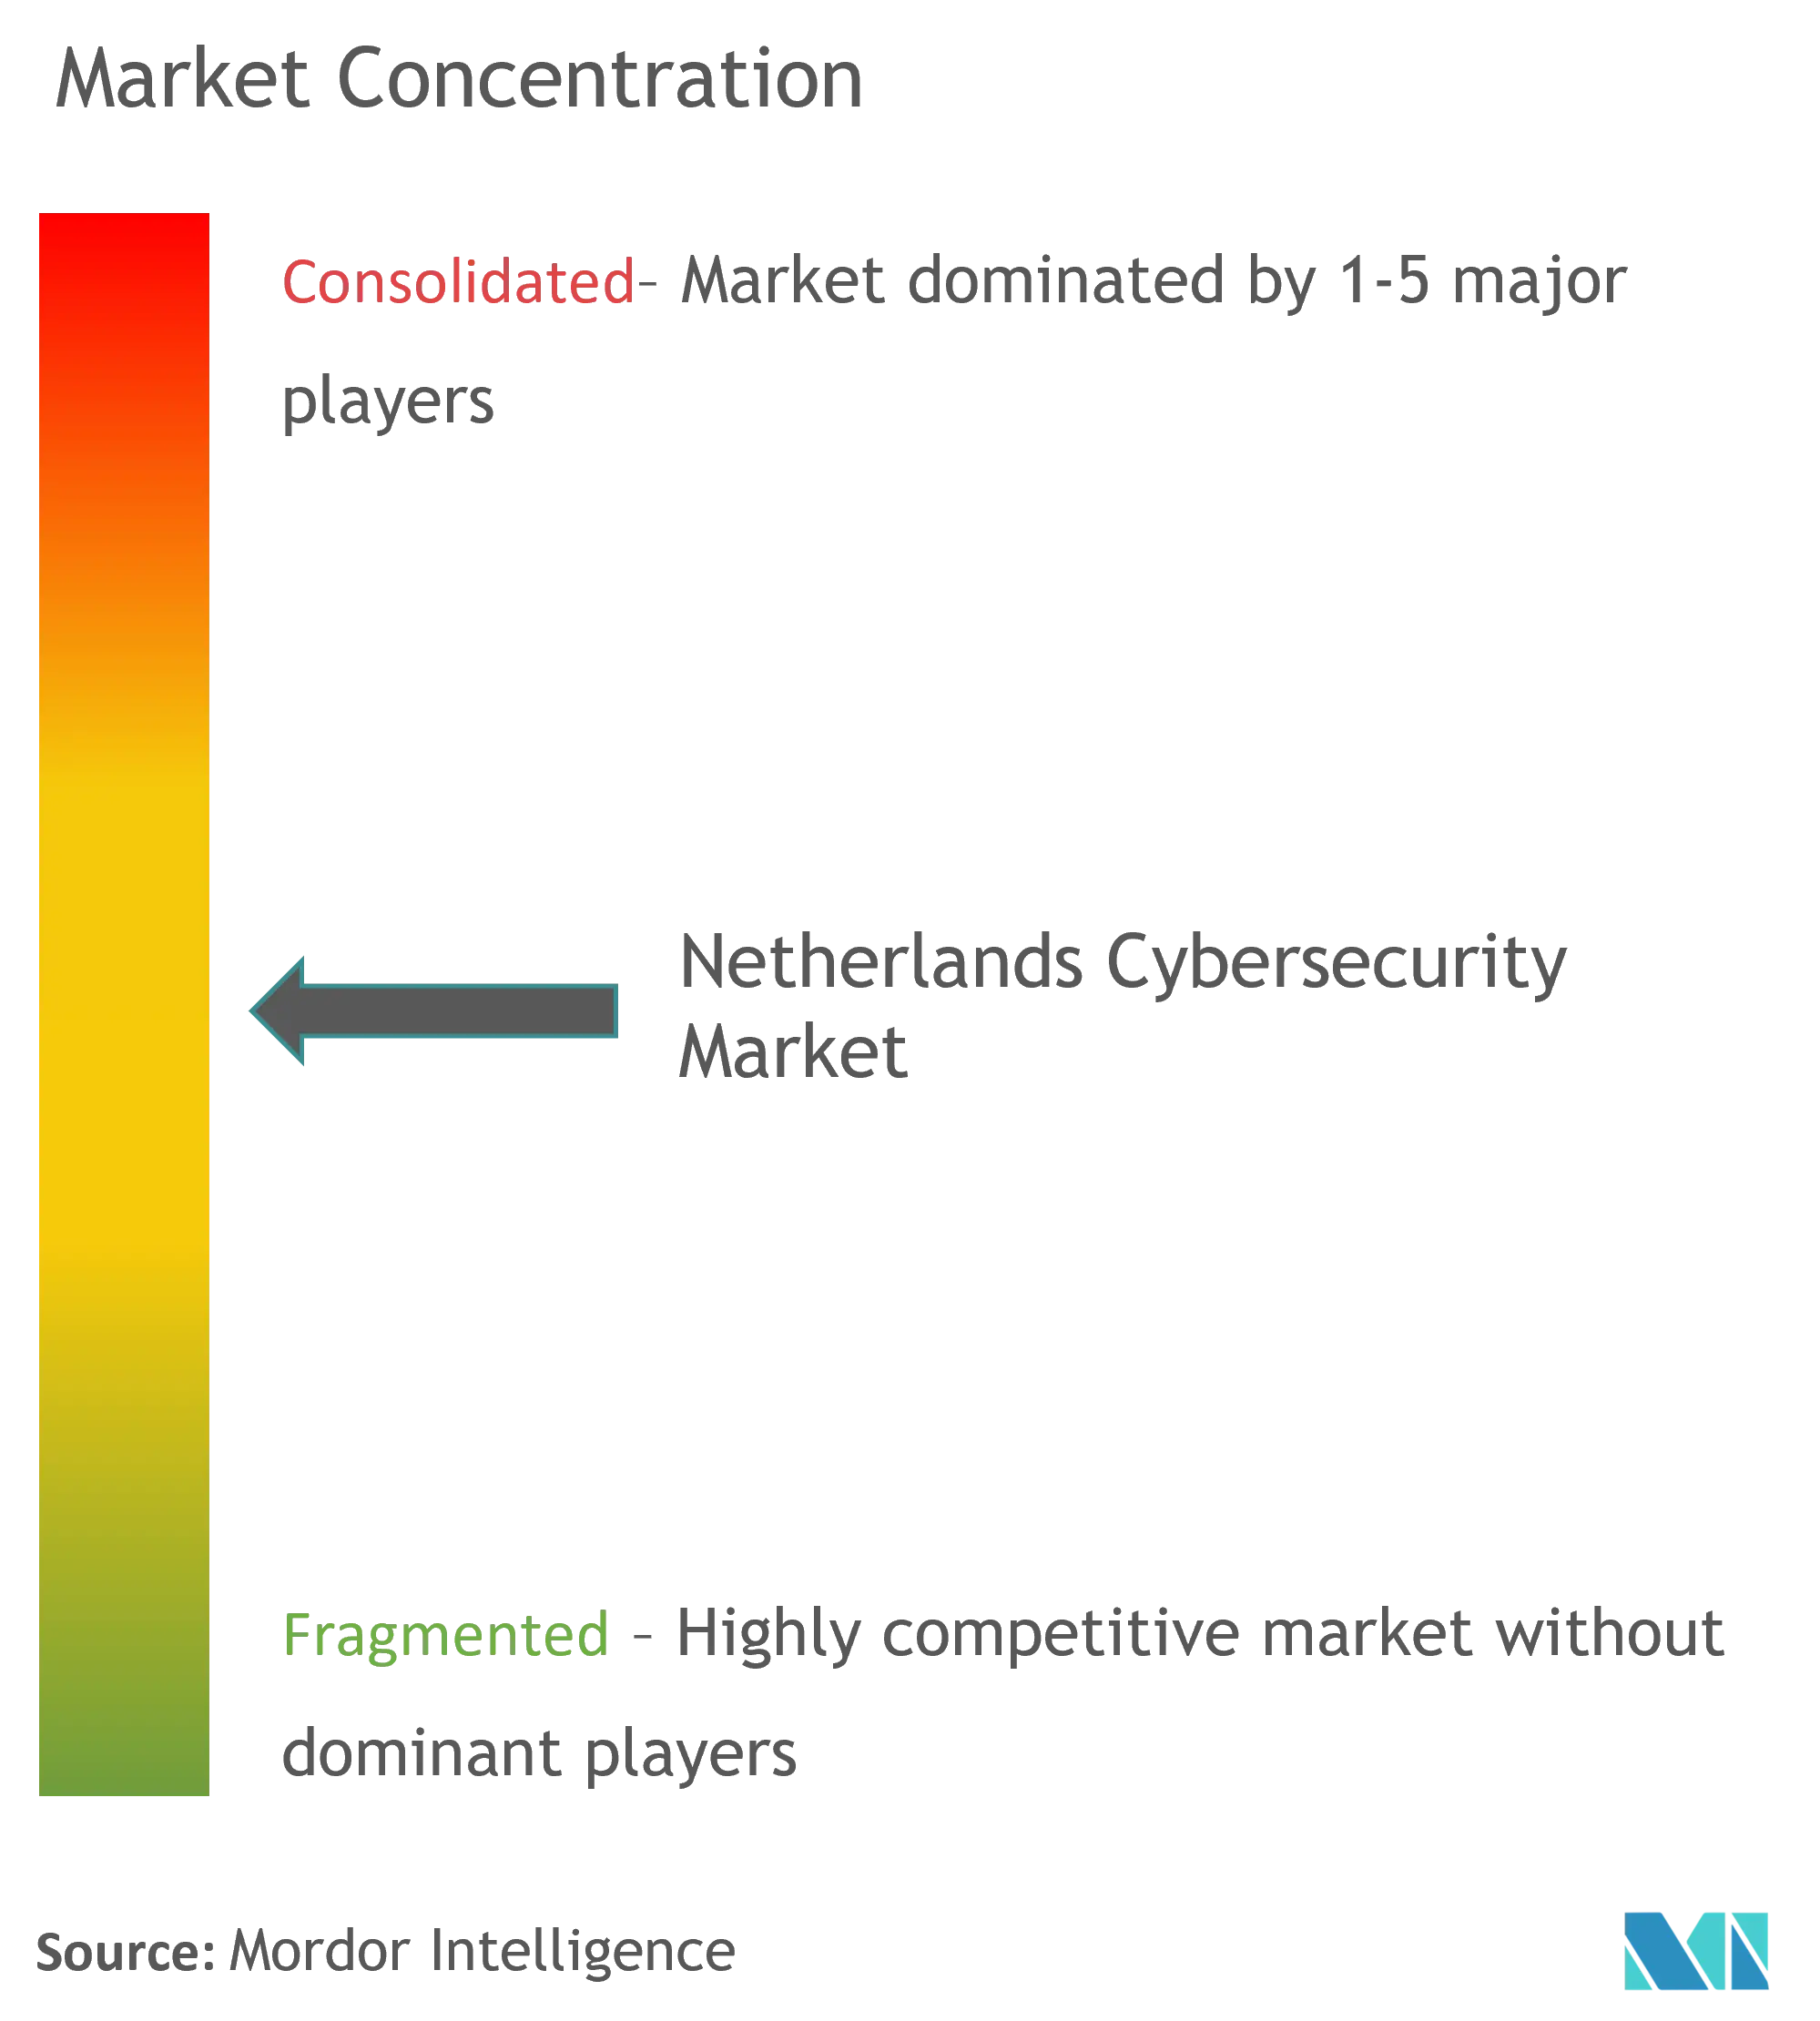 Netherlands Cybersecurity Market Concentration